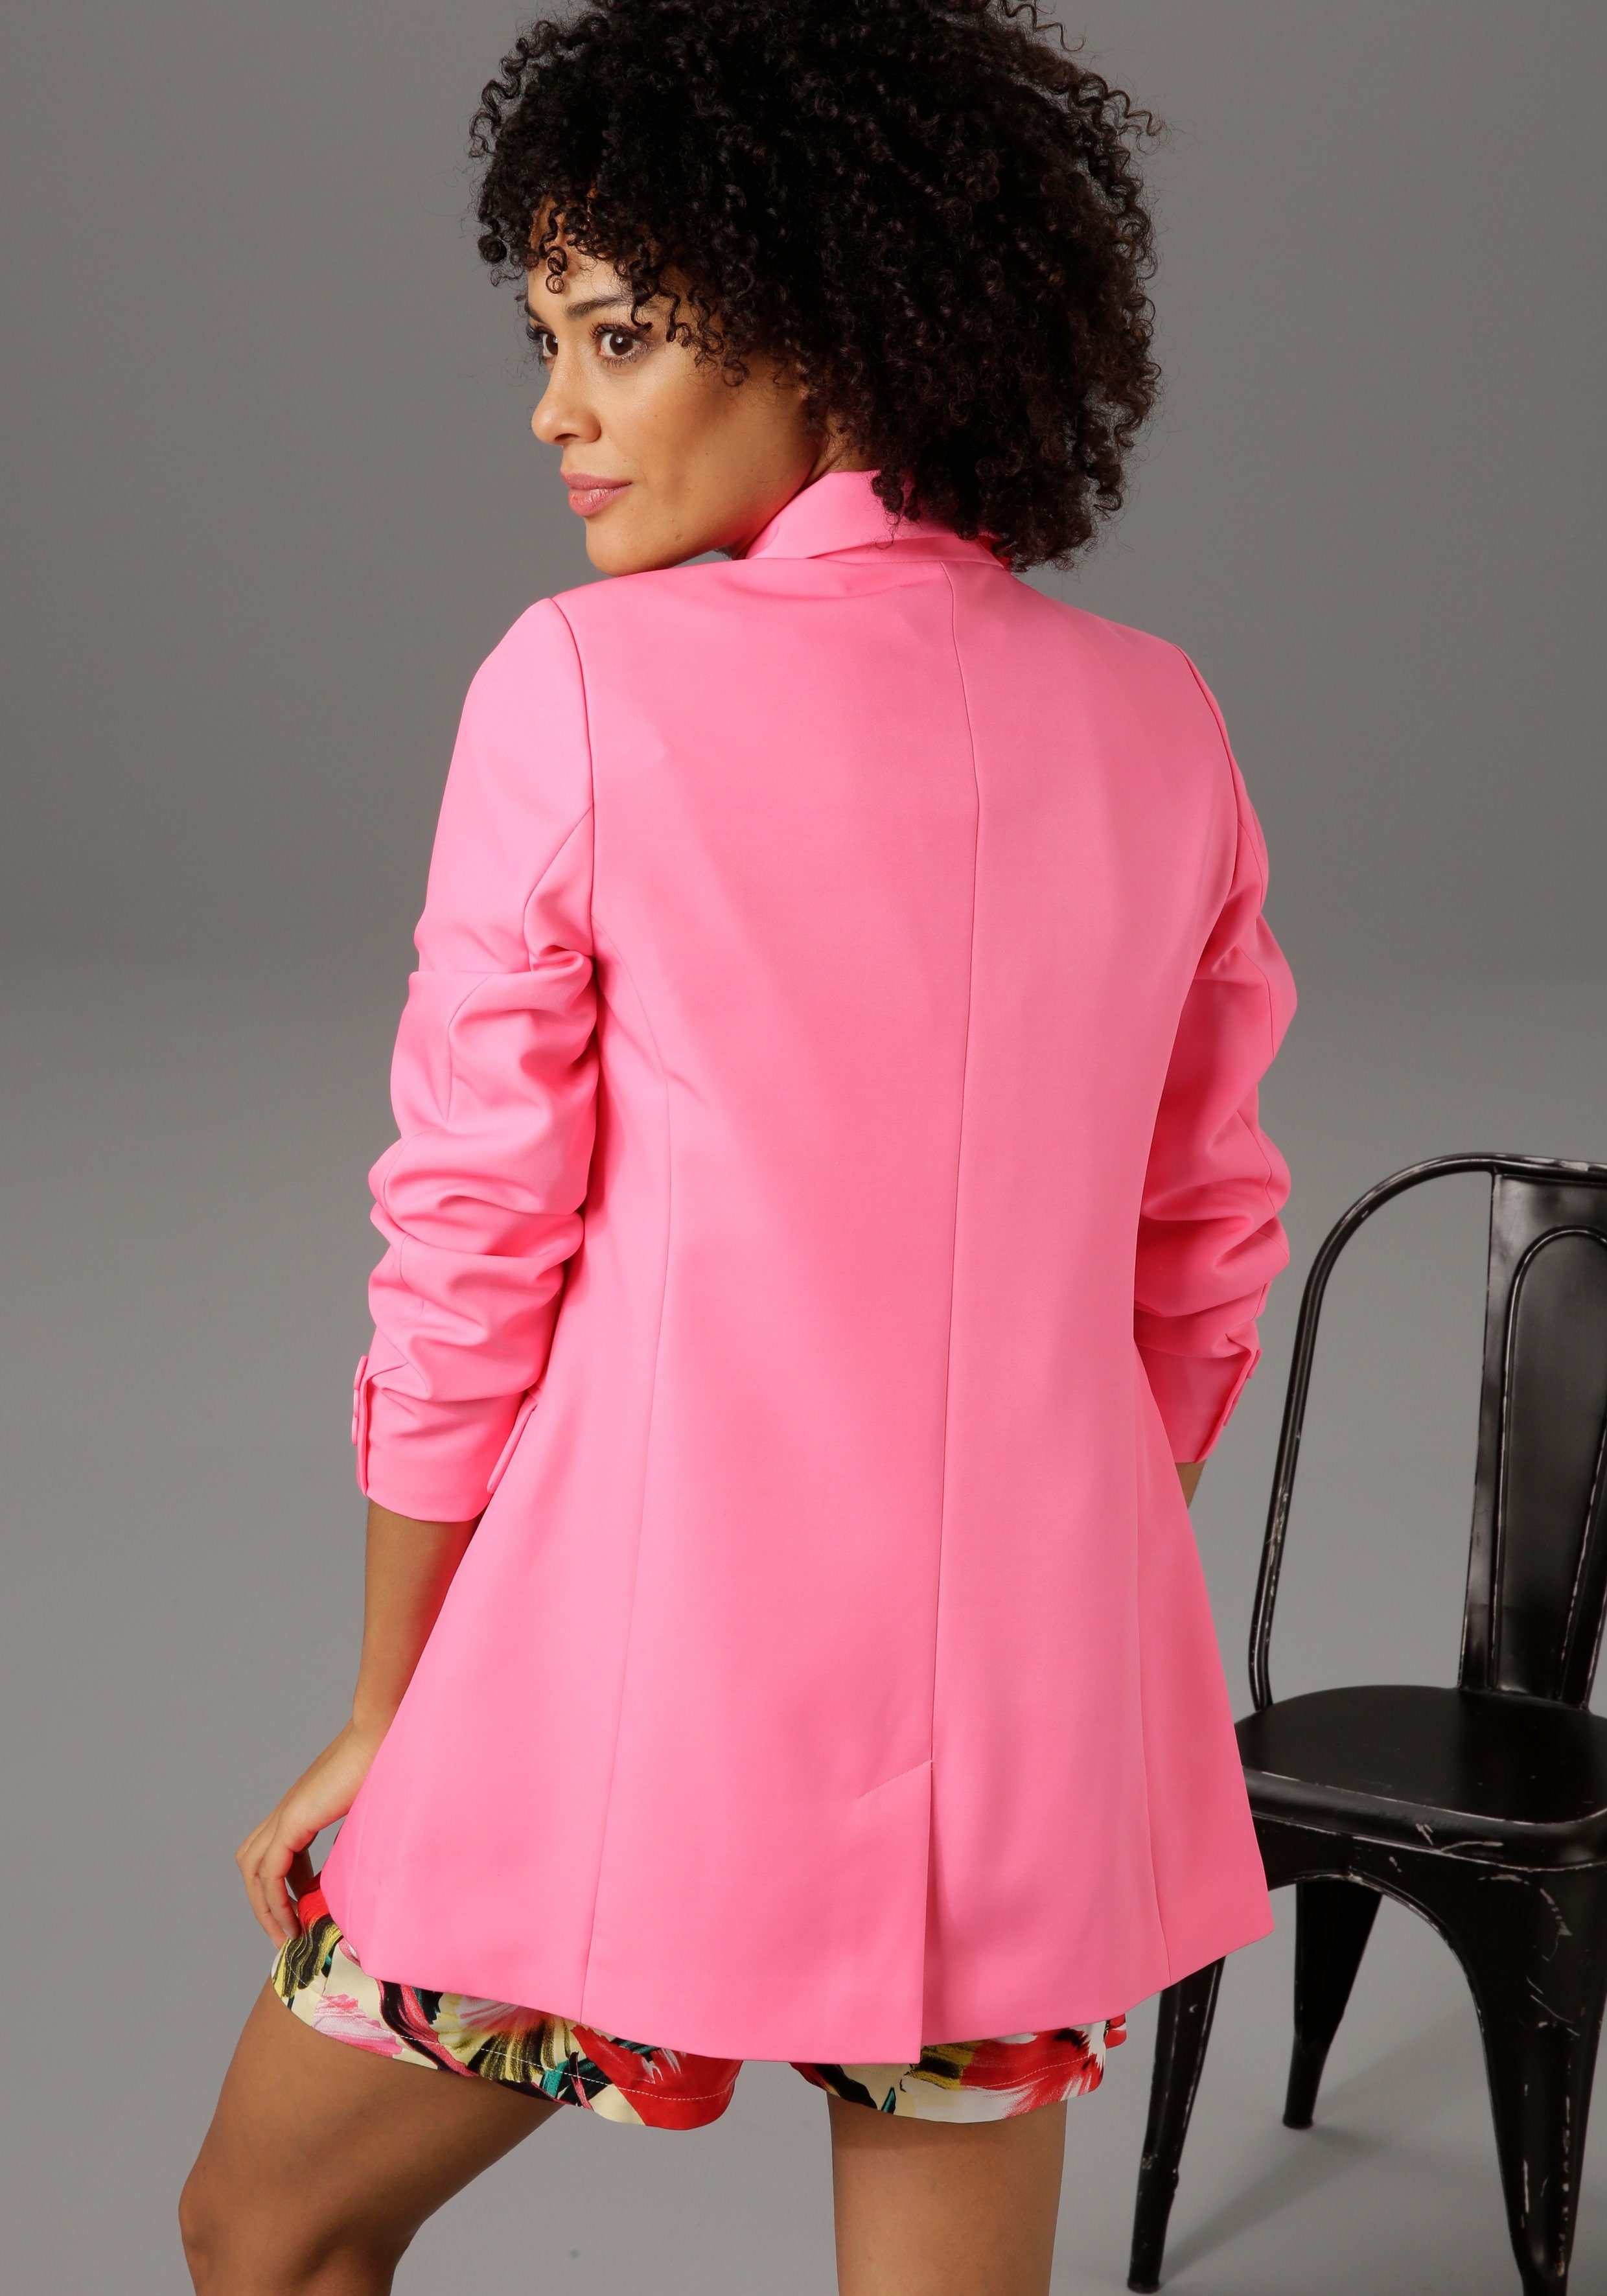 CASUAL Farbpalette Aniston angesagter pink Longblazer in